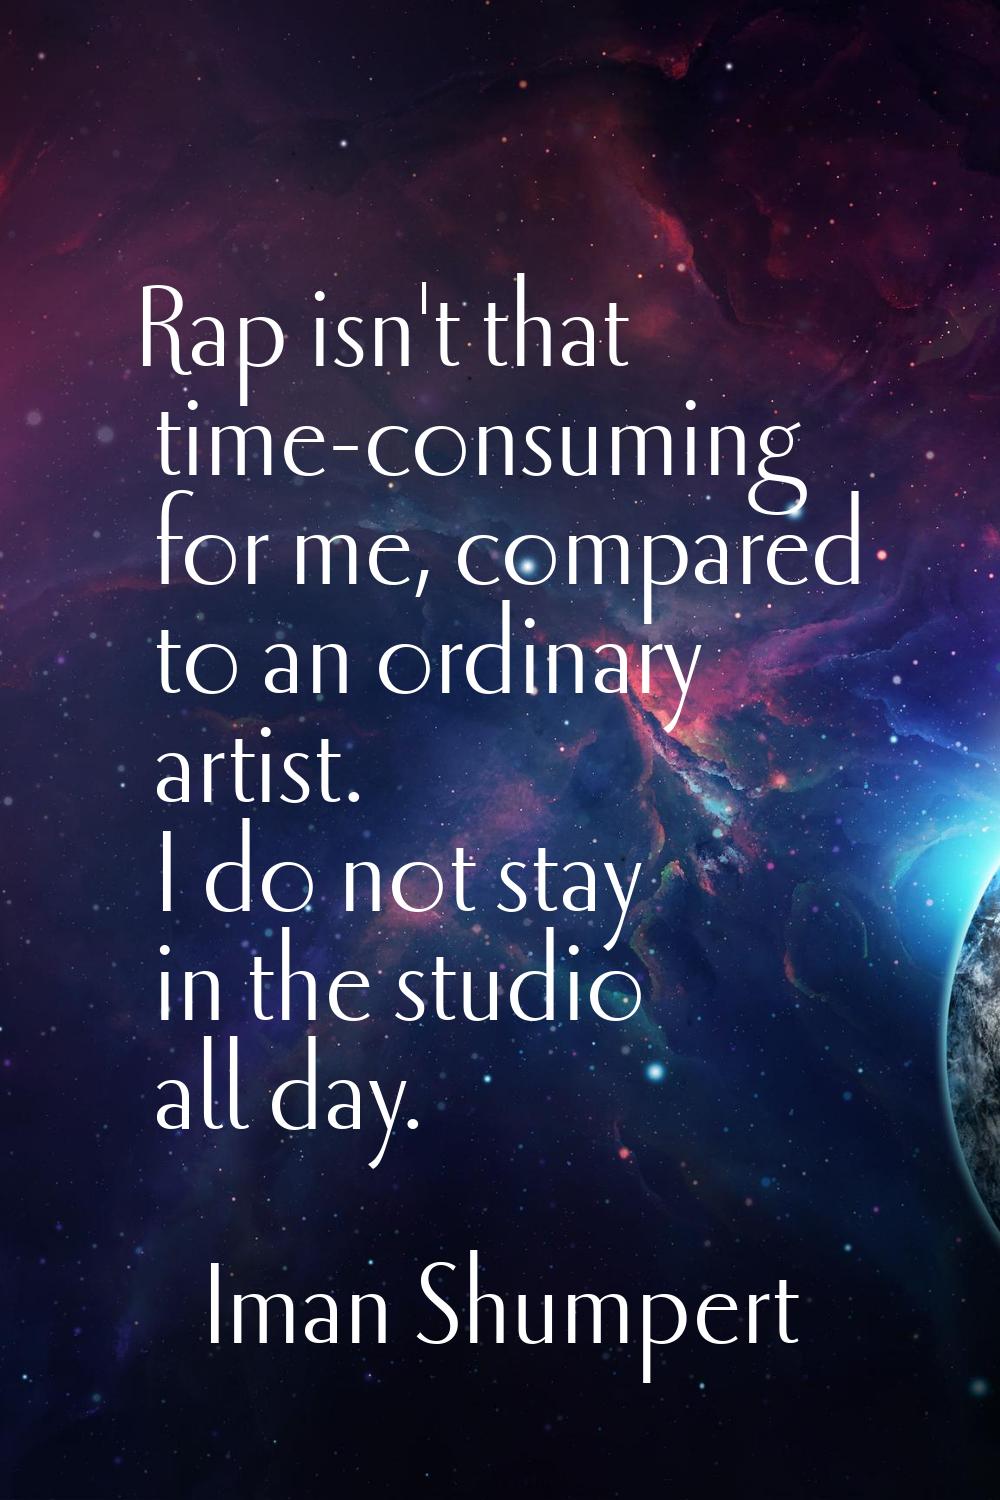 Rap isn't that time-consuming for me, compared to an ordinary artist. I do not stay in the studio a